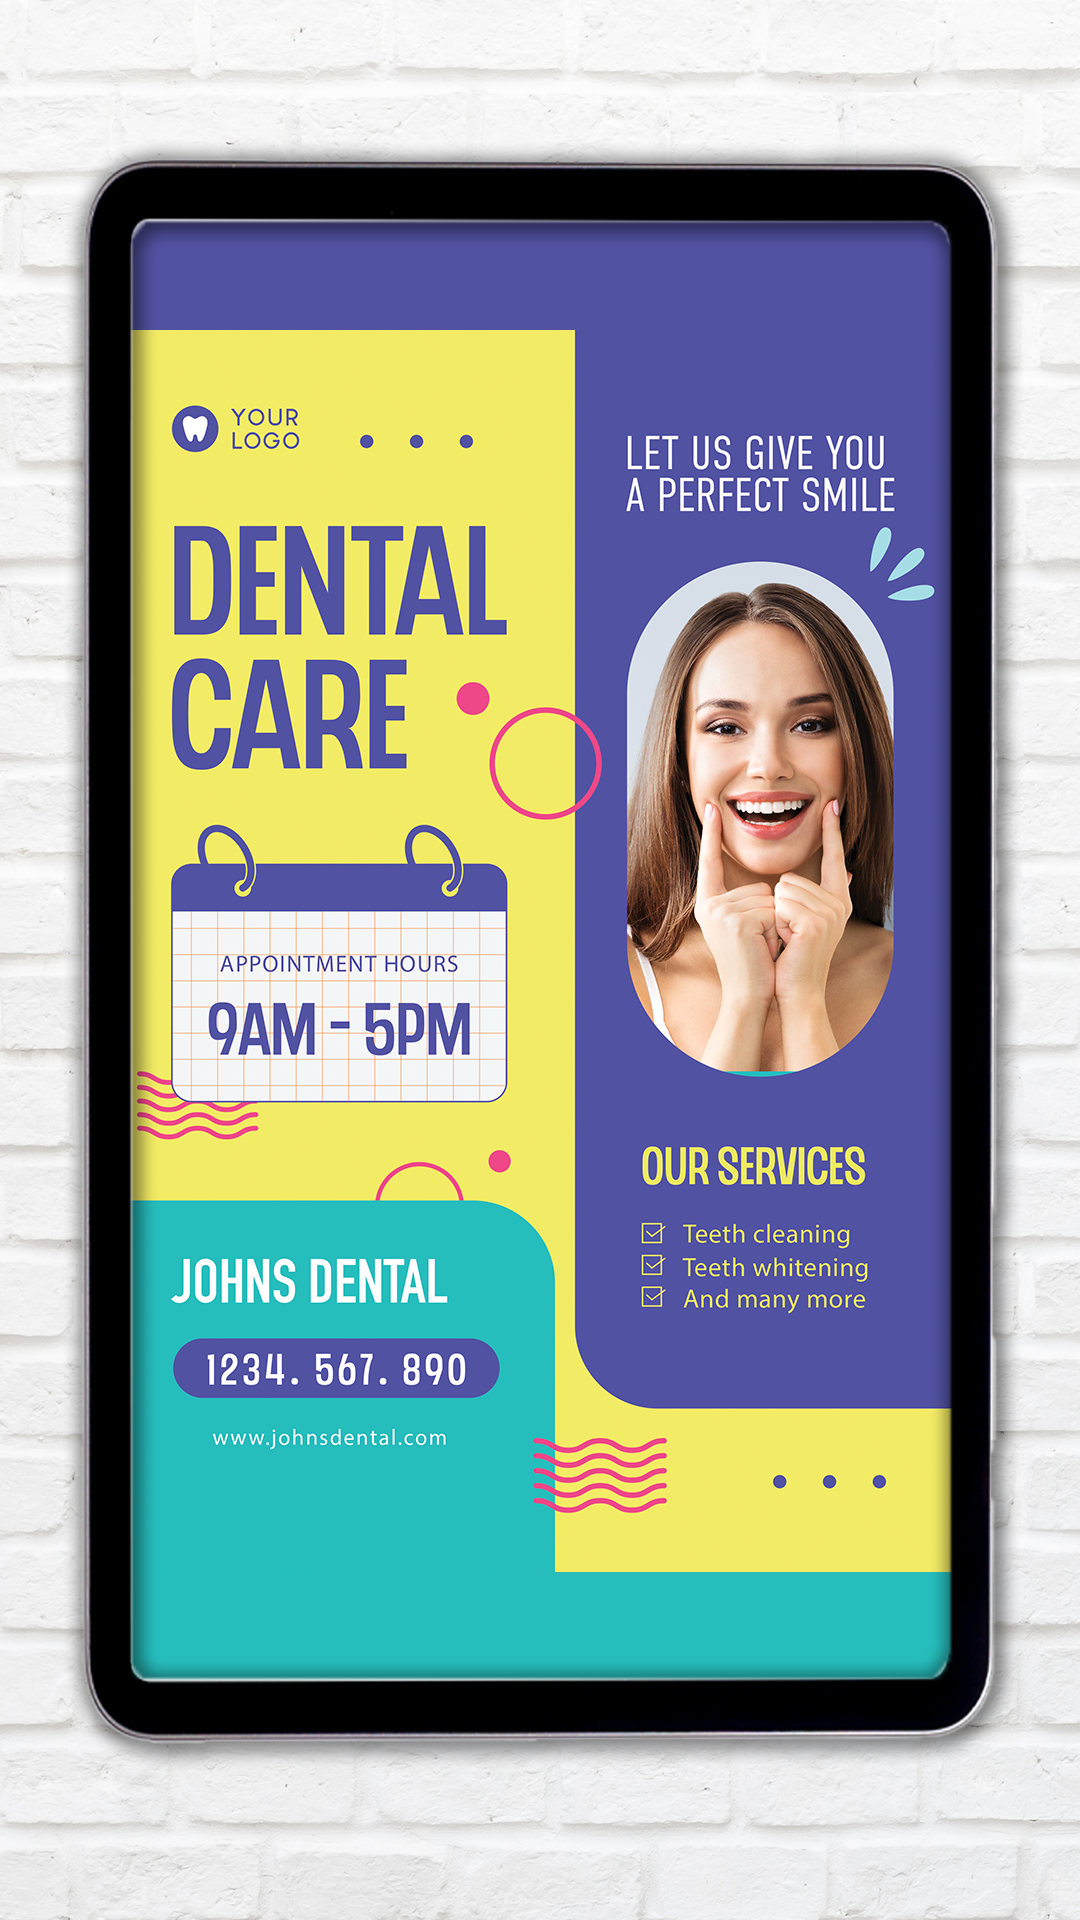 A dental care flyer with a smiling woman on it.